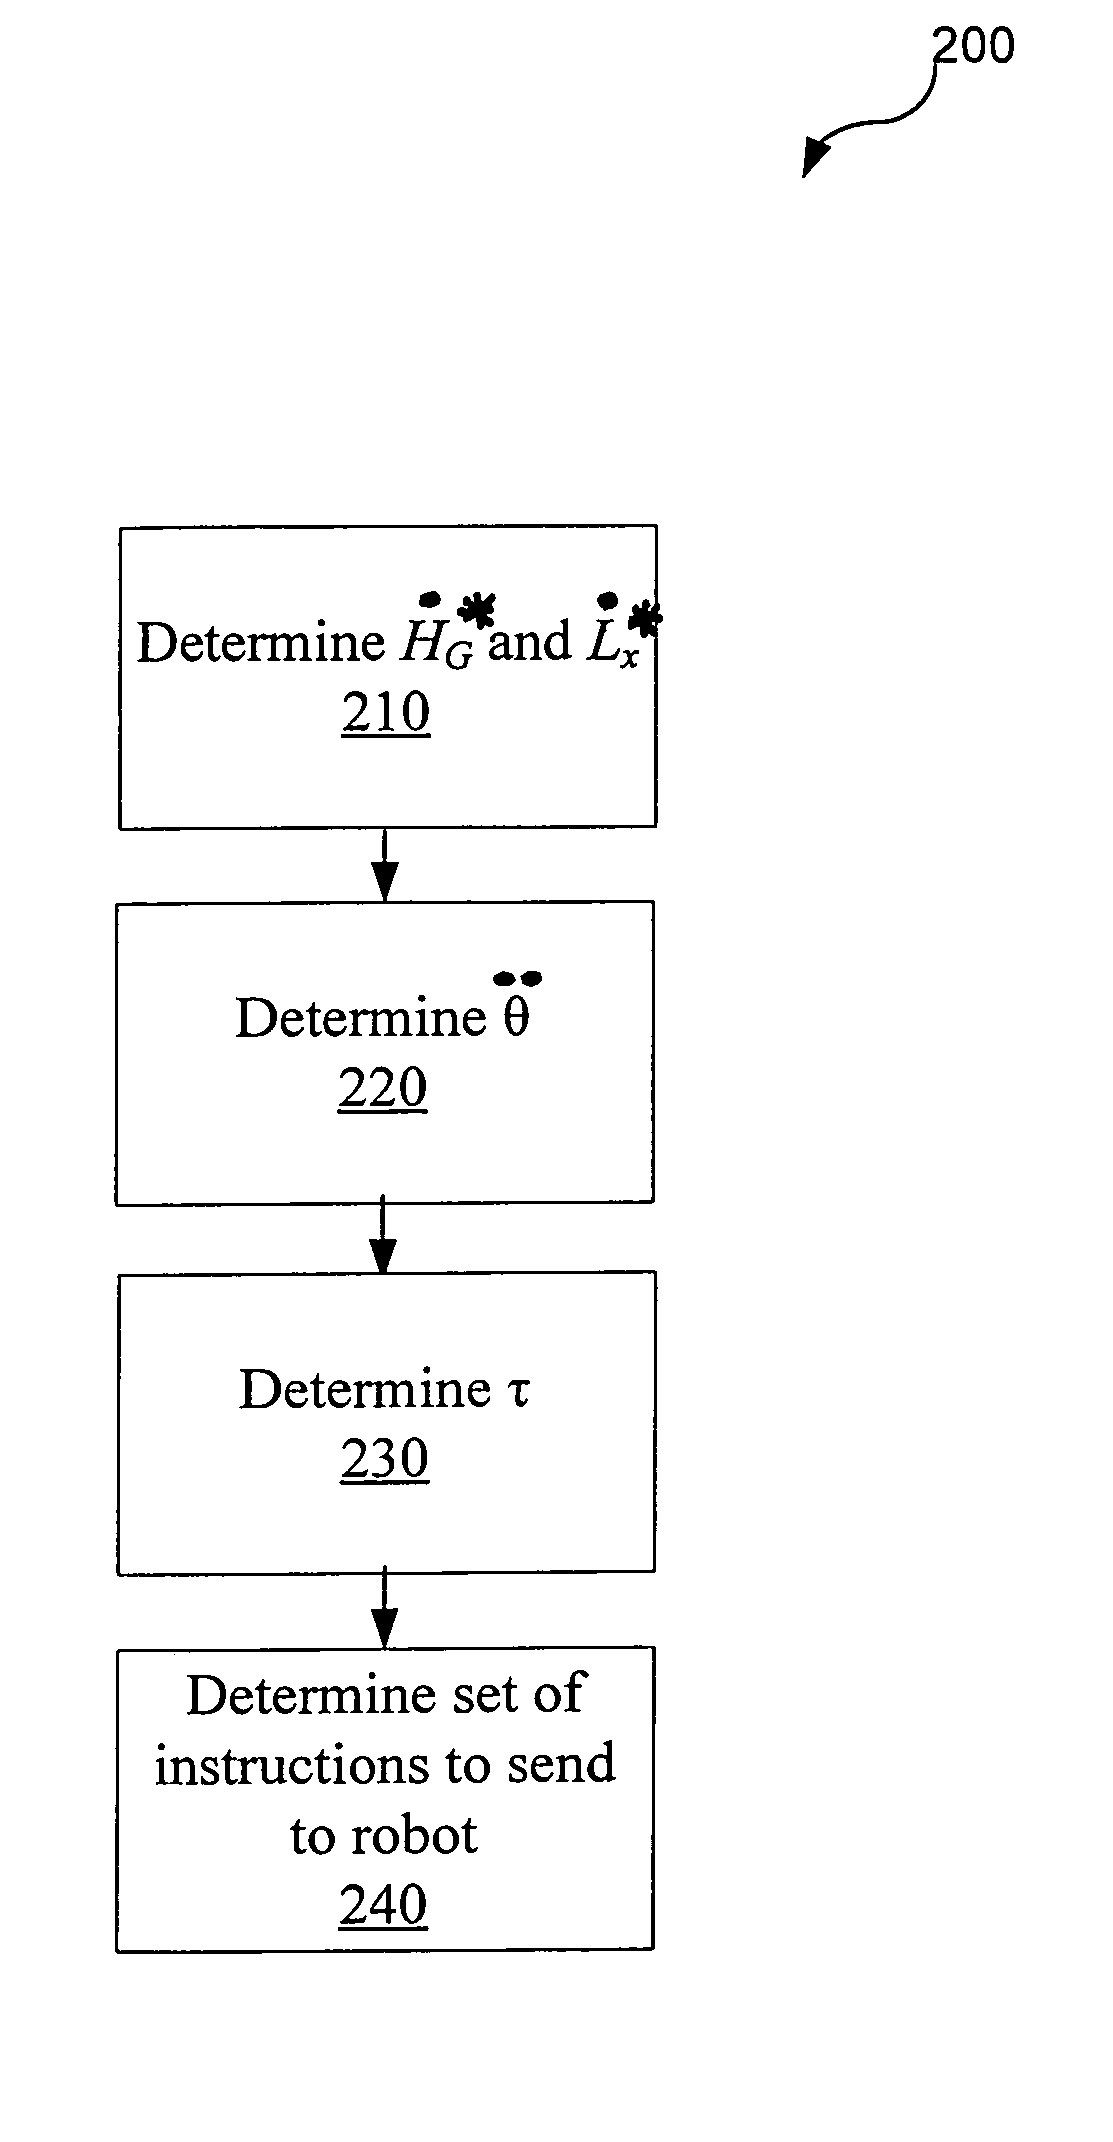 Systems and methods for controlling a legged robot using a two-phase disturbance response strategy